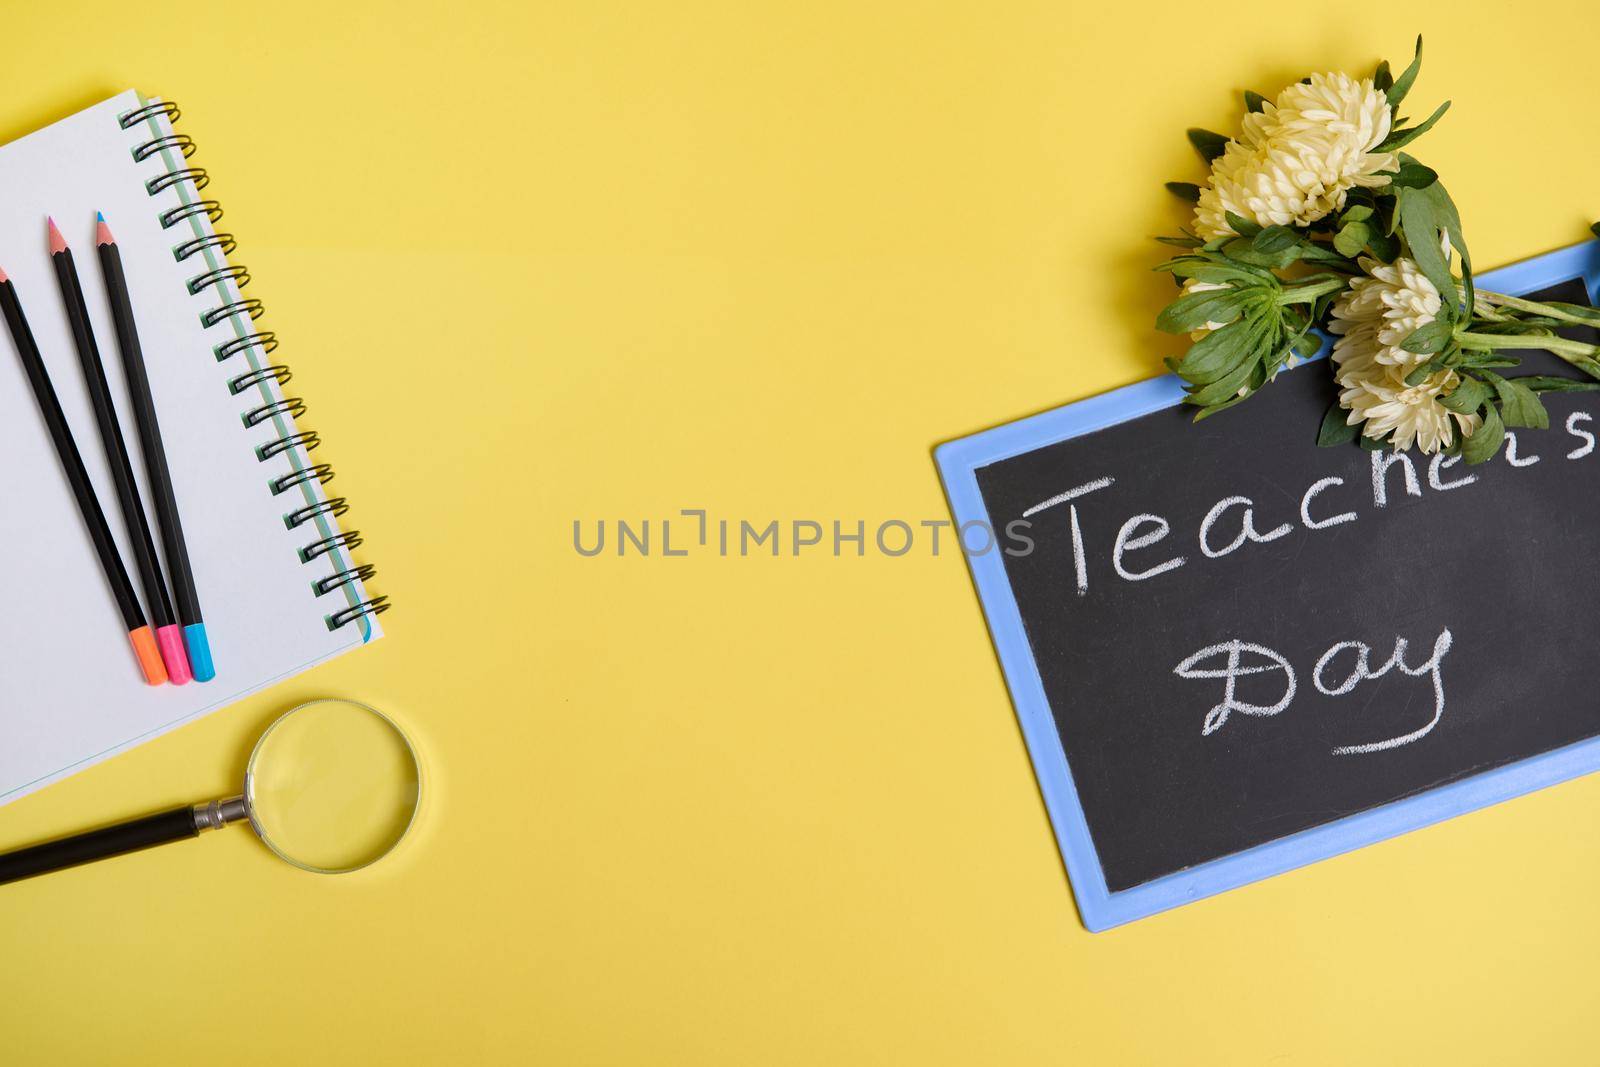 Asters flowers lying down on a chalkboard with text Teachers Day , and a magnifier loupe next to colored pencils on a blank sheets of a notepad isolated on yellow background with copy space. Flat lay